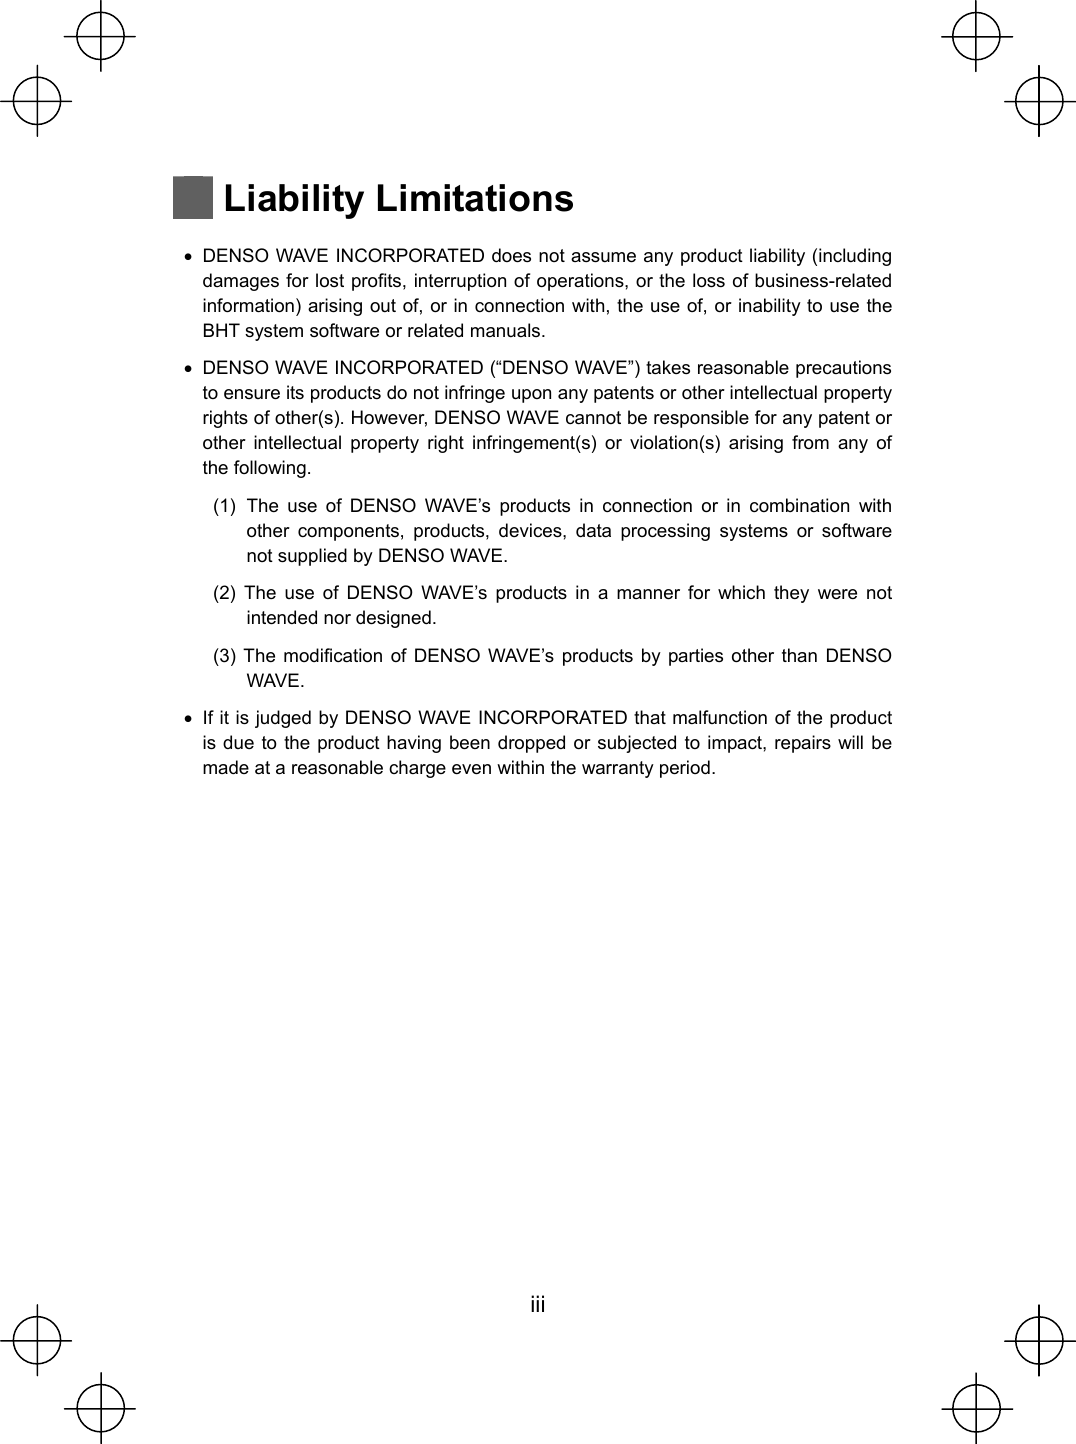  iii   Liability Limitations  x  DENSO WAVE INCORPORATED does not assume any product liability (including damages for lost profits, interruption of operations, or the loss of business-related information) arising out of, or in connection with, the use of, or inability to use the BHT system software or related manuals. x  DENSO WAVE INCORPORATED (“DENSO WAVE”) takes reasonable precautions to ensure its products do not infringe upon any patents or other intellectual property rights of other(s). However, DENSO WAVE cannot be responsible for any patent or other intellectual property right infringement(s) or violation(s) arising from any of the following. (1) The use of DENSO WAVE’s products in connection or in combination with other components, products, devices, data processing systems or software not supplied by DENSO WAVE. (2) The use of DENSO WAVE’s products in a manner for which they were not intended nor designed. (3) The modification of DENSO WAVE’s products by parties other than DENSO WAVE. x  If it is judged by DENSO WAVE INCORPORATED that malfunction of the product is due to the product having been dropped or subjected to impact, repairs will be made at a reasonable charge even within the warranty period. 